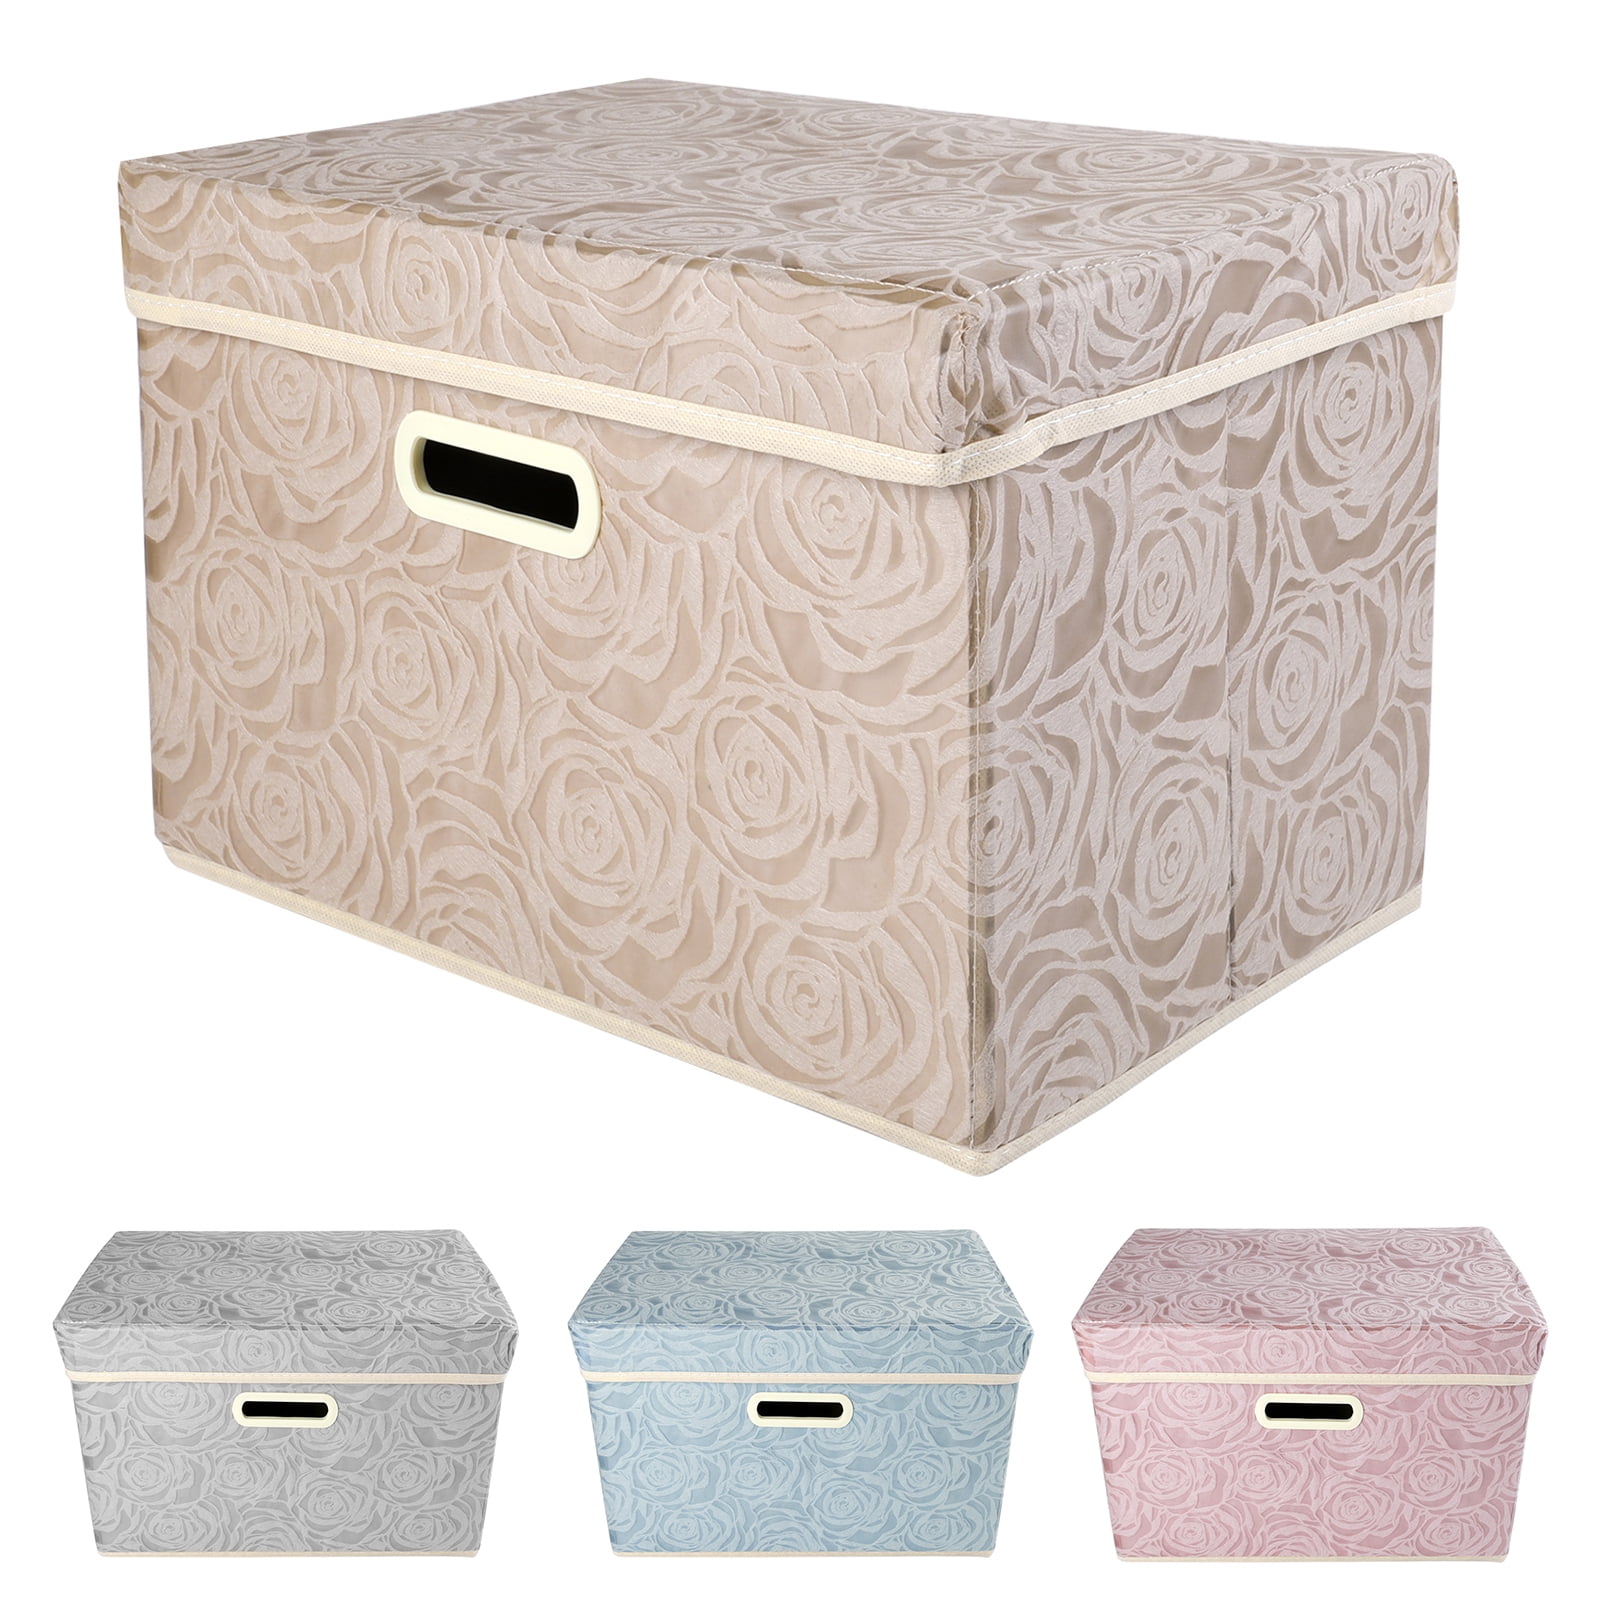 Collapsible Storage Bins with Lids Fabric Decorative Storage Boxes ...